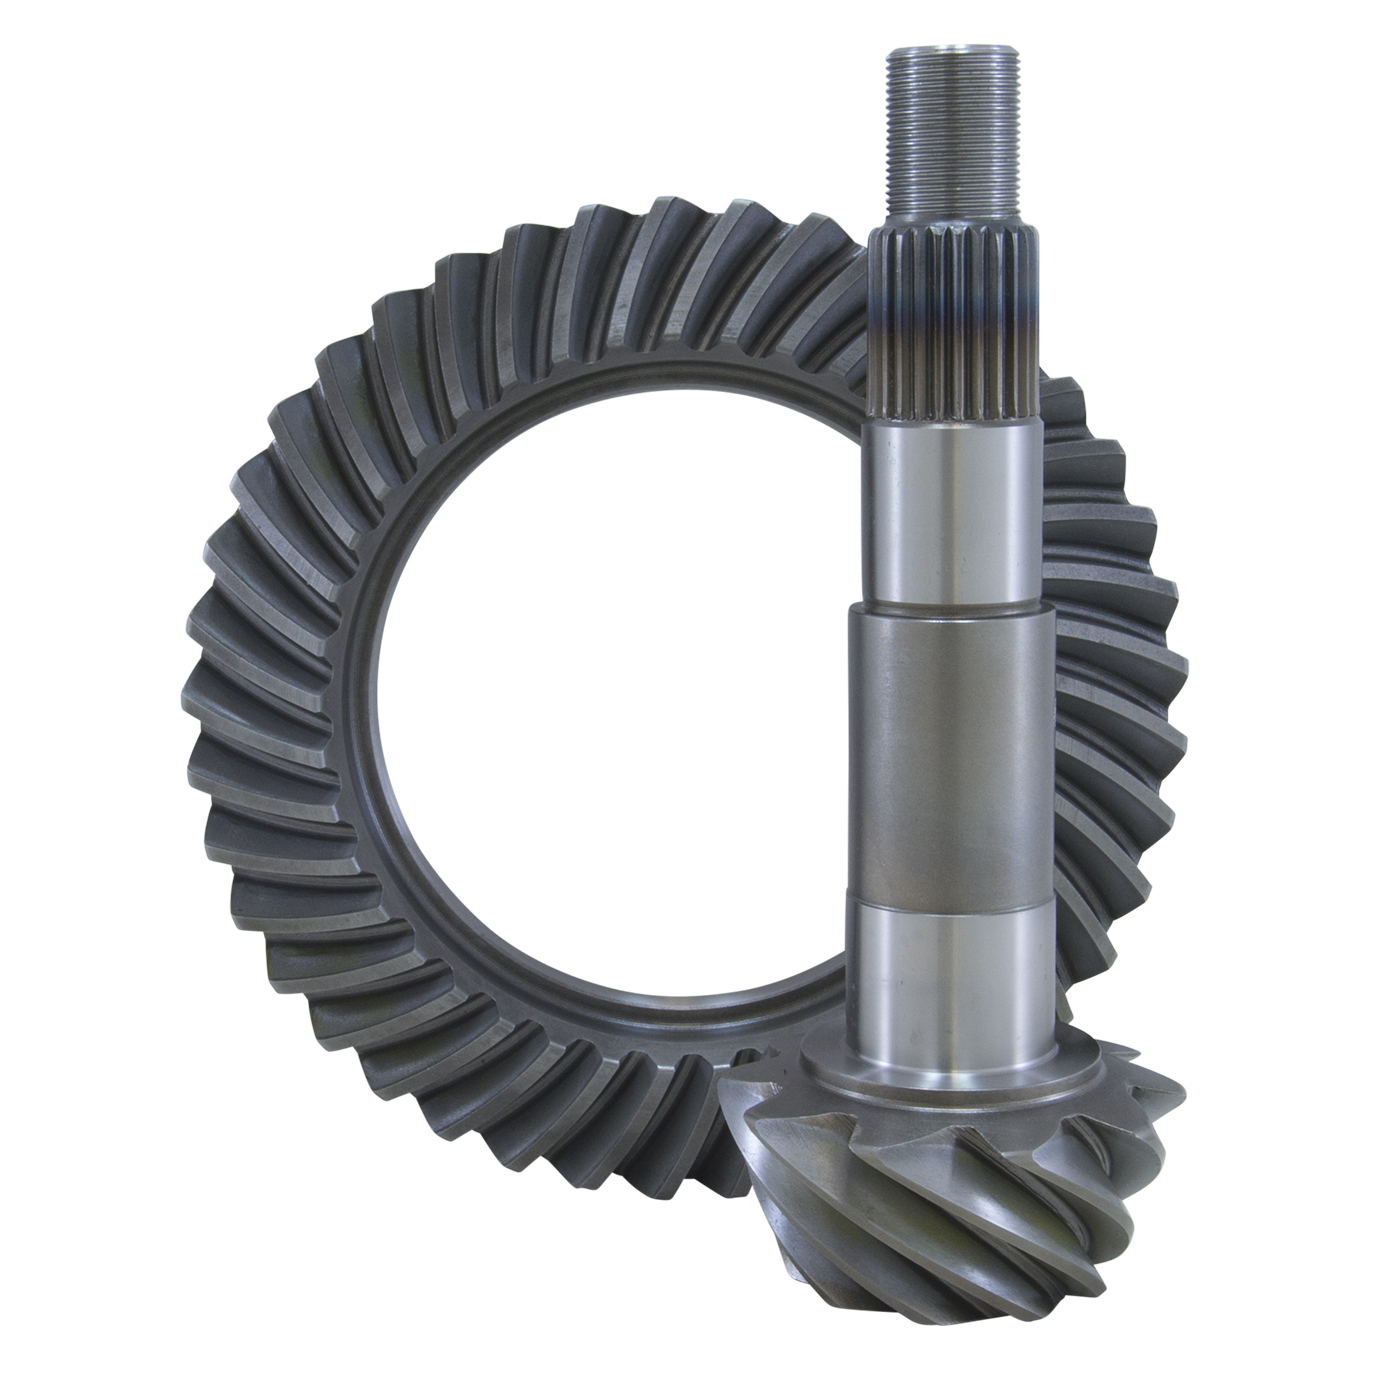 USA Standard Ring & Pinion gear set for Model 35 in a 5.13 ratio.